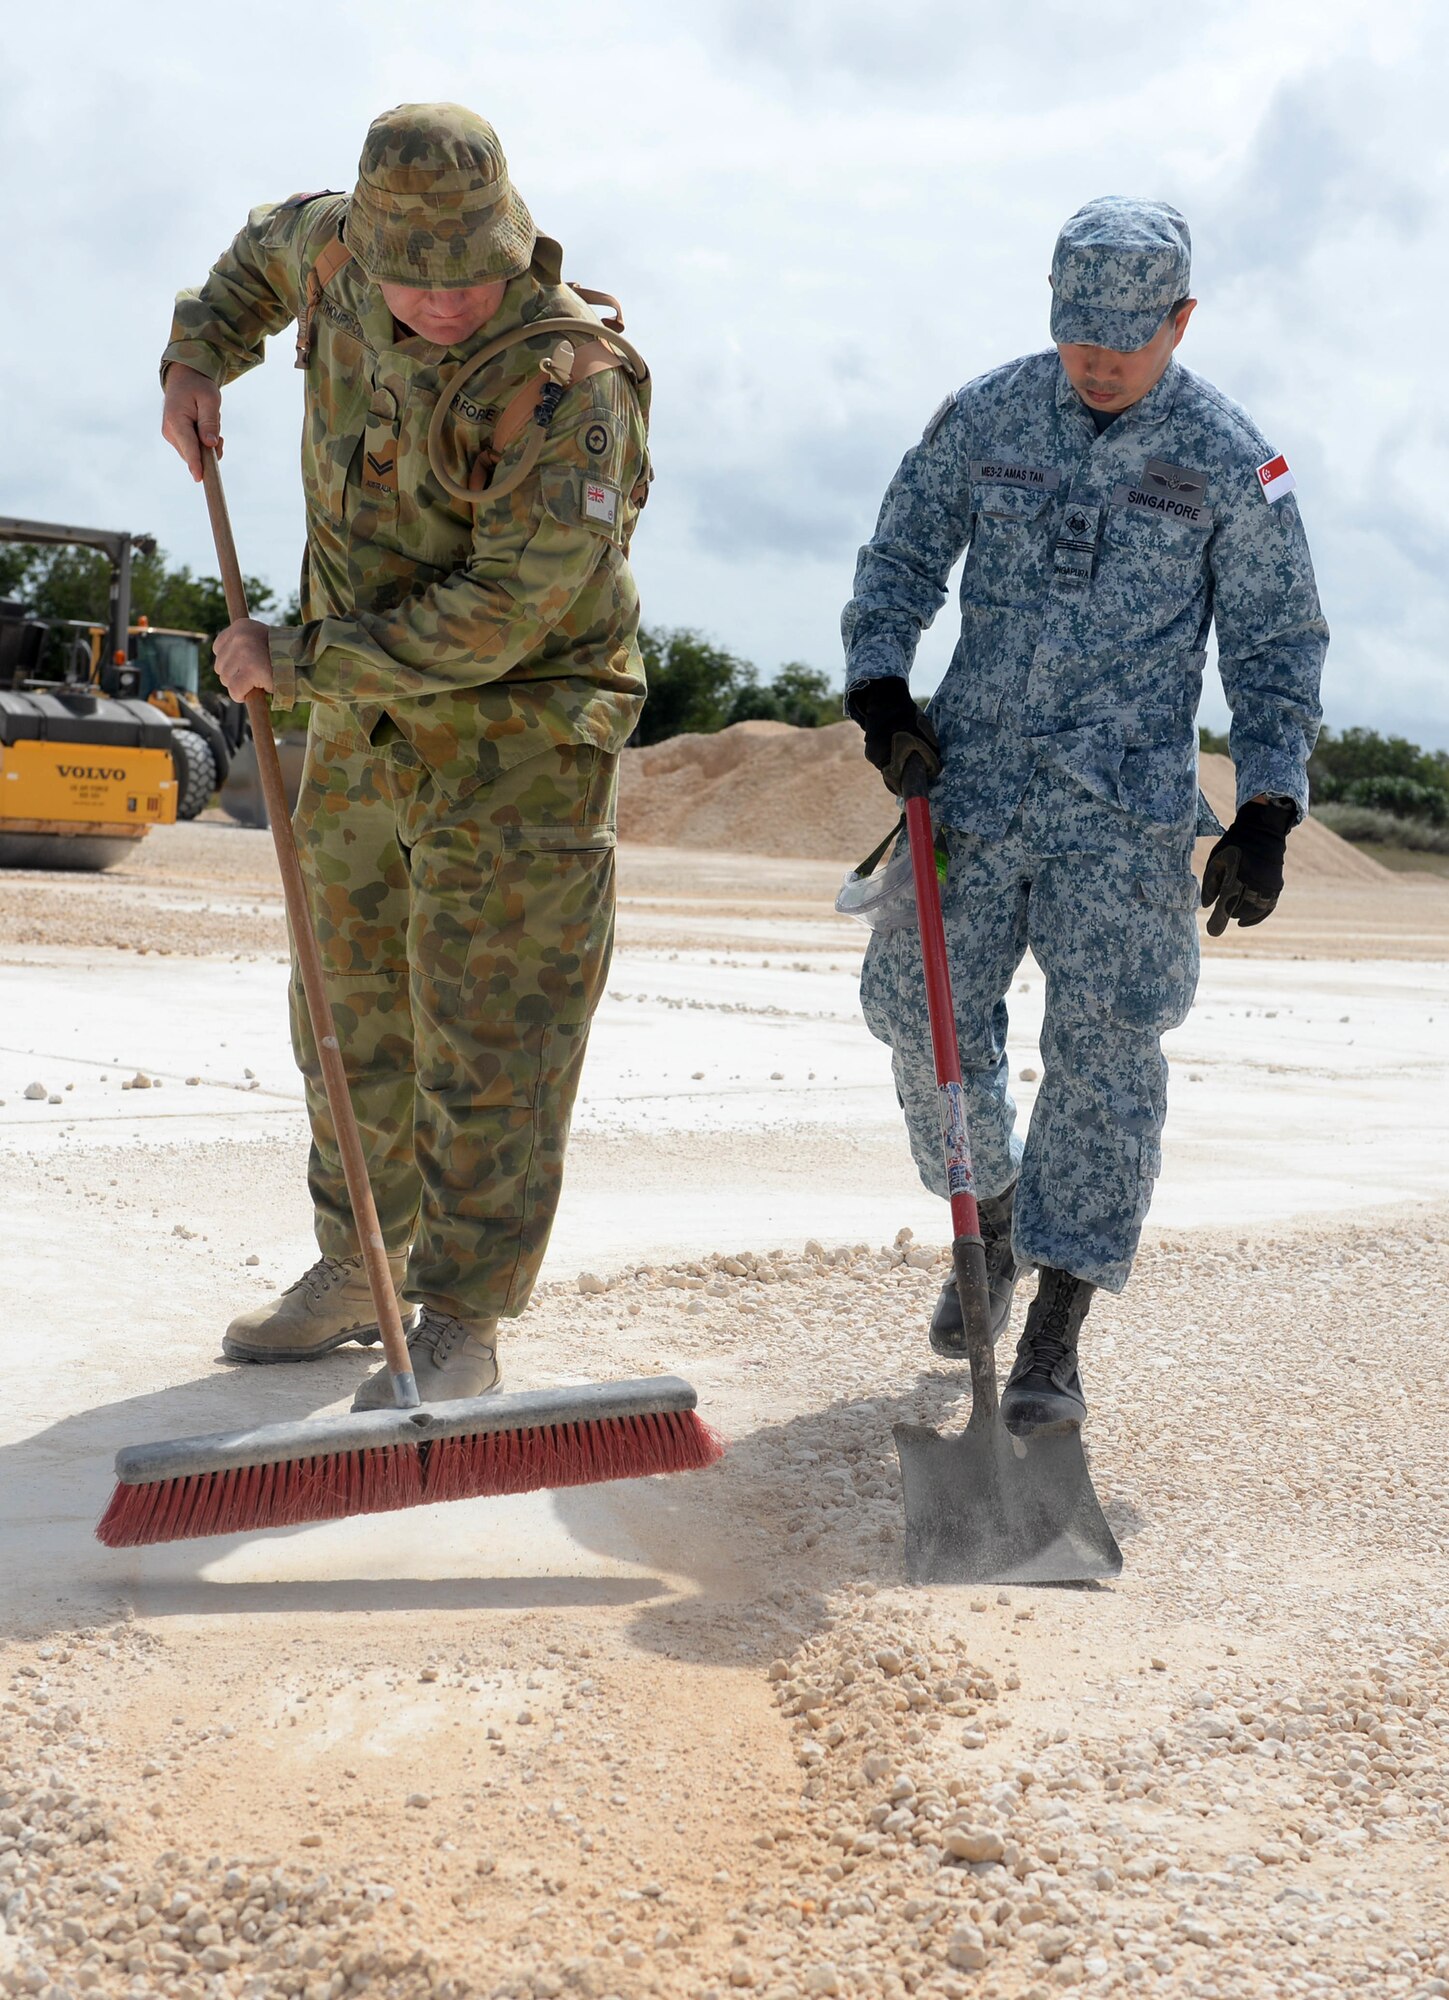 Royal Australian Air Force Cpl. Robert Thompson, plant operator, and Republic of Singapore Air Force Military Expert 1 Amas Tan, flight warrant operator, clear the edge of a crater during the final stages of crater repair during Partner Nation Silver Flag Feb. 16, 2016, at Andersen Air Force Base, Guam.  The exercise is a small part of the first multilateral Silver Flag exercise, a U.S. Pacific Command multilateral Theater Security Cooperation Program subject matter expert exchange event designed to build partnerships and promote interoperability through the equitable exchange of civil engineer related information. (U.S. Air Force photo by Senior Airman Joshua Smoot/Released)